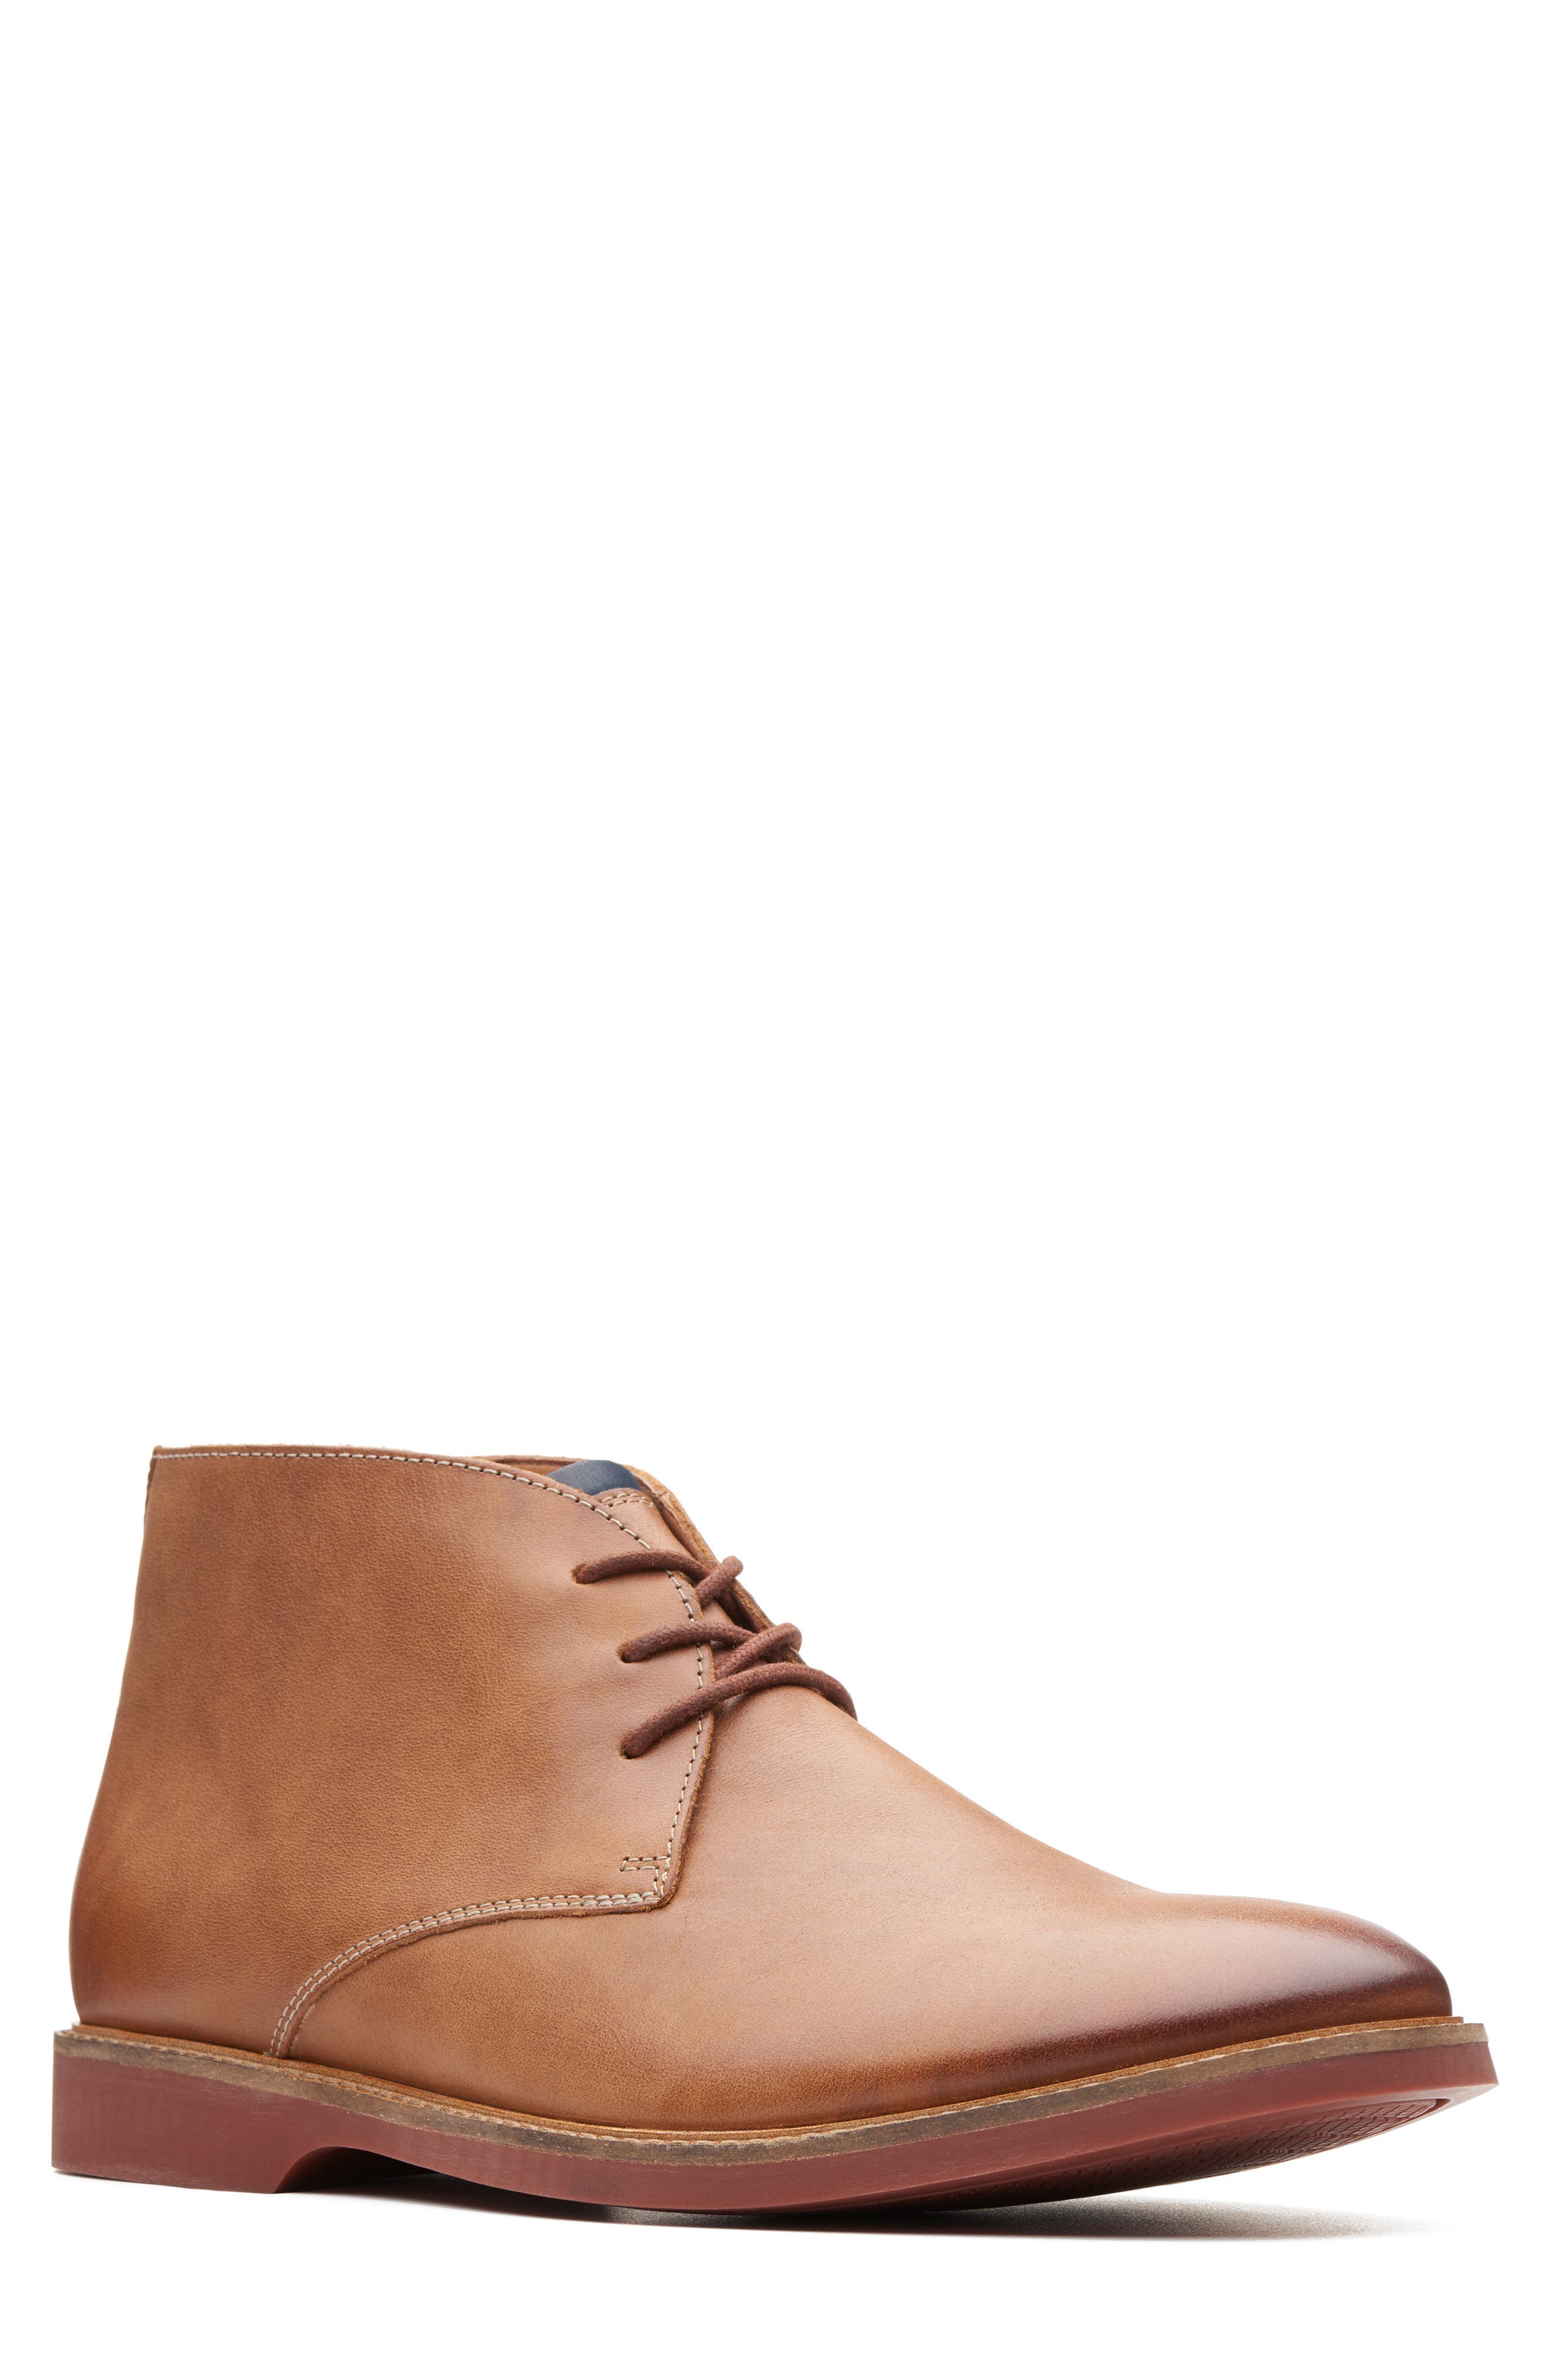 clarks shoes clearance mens